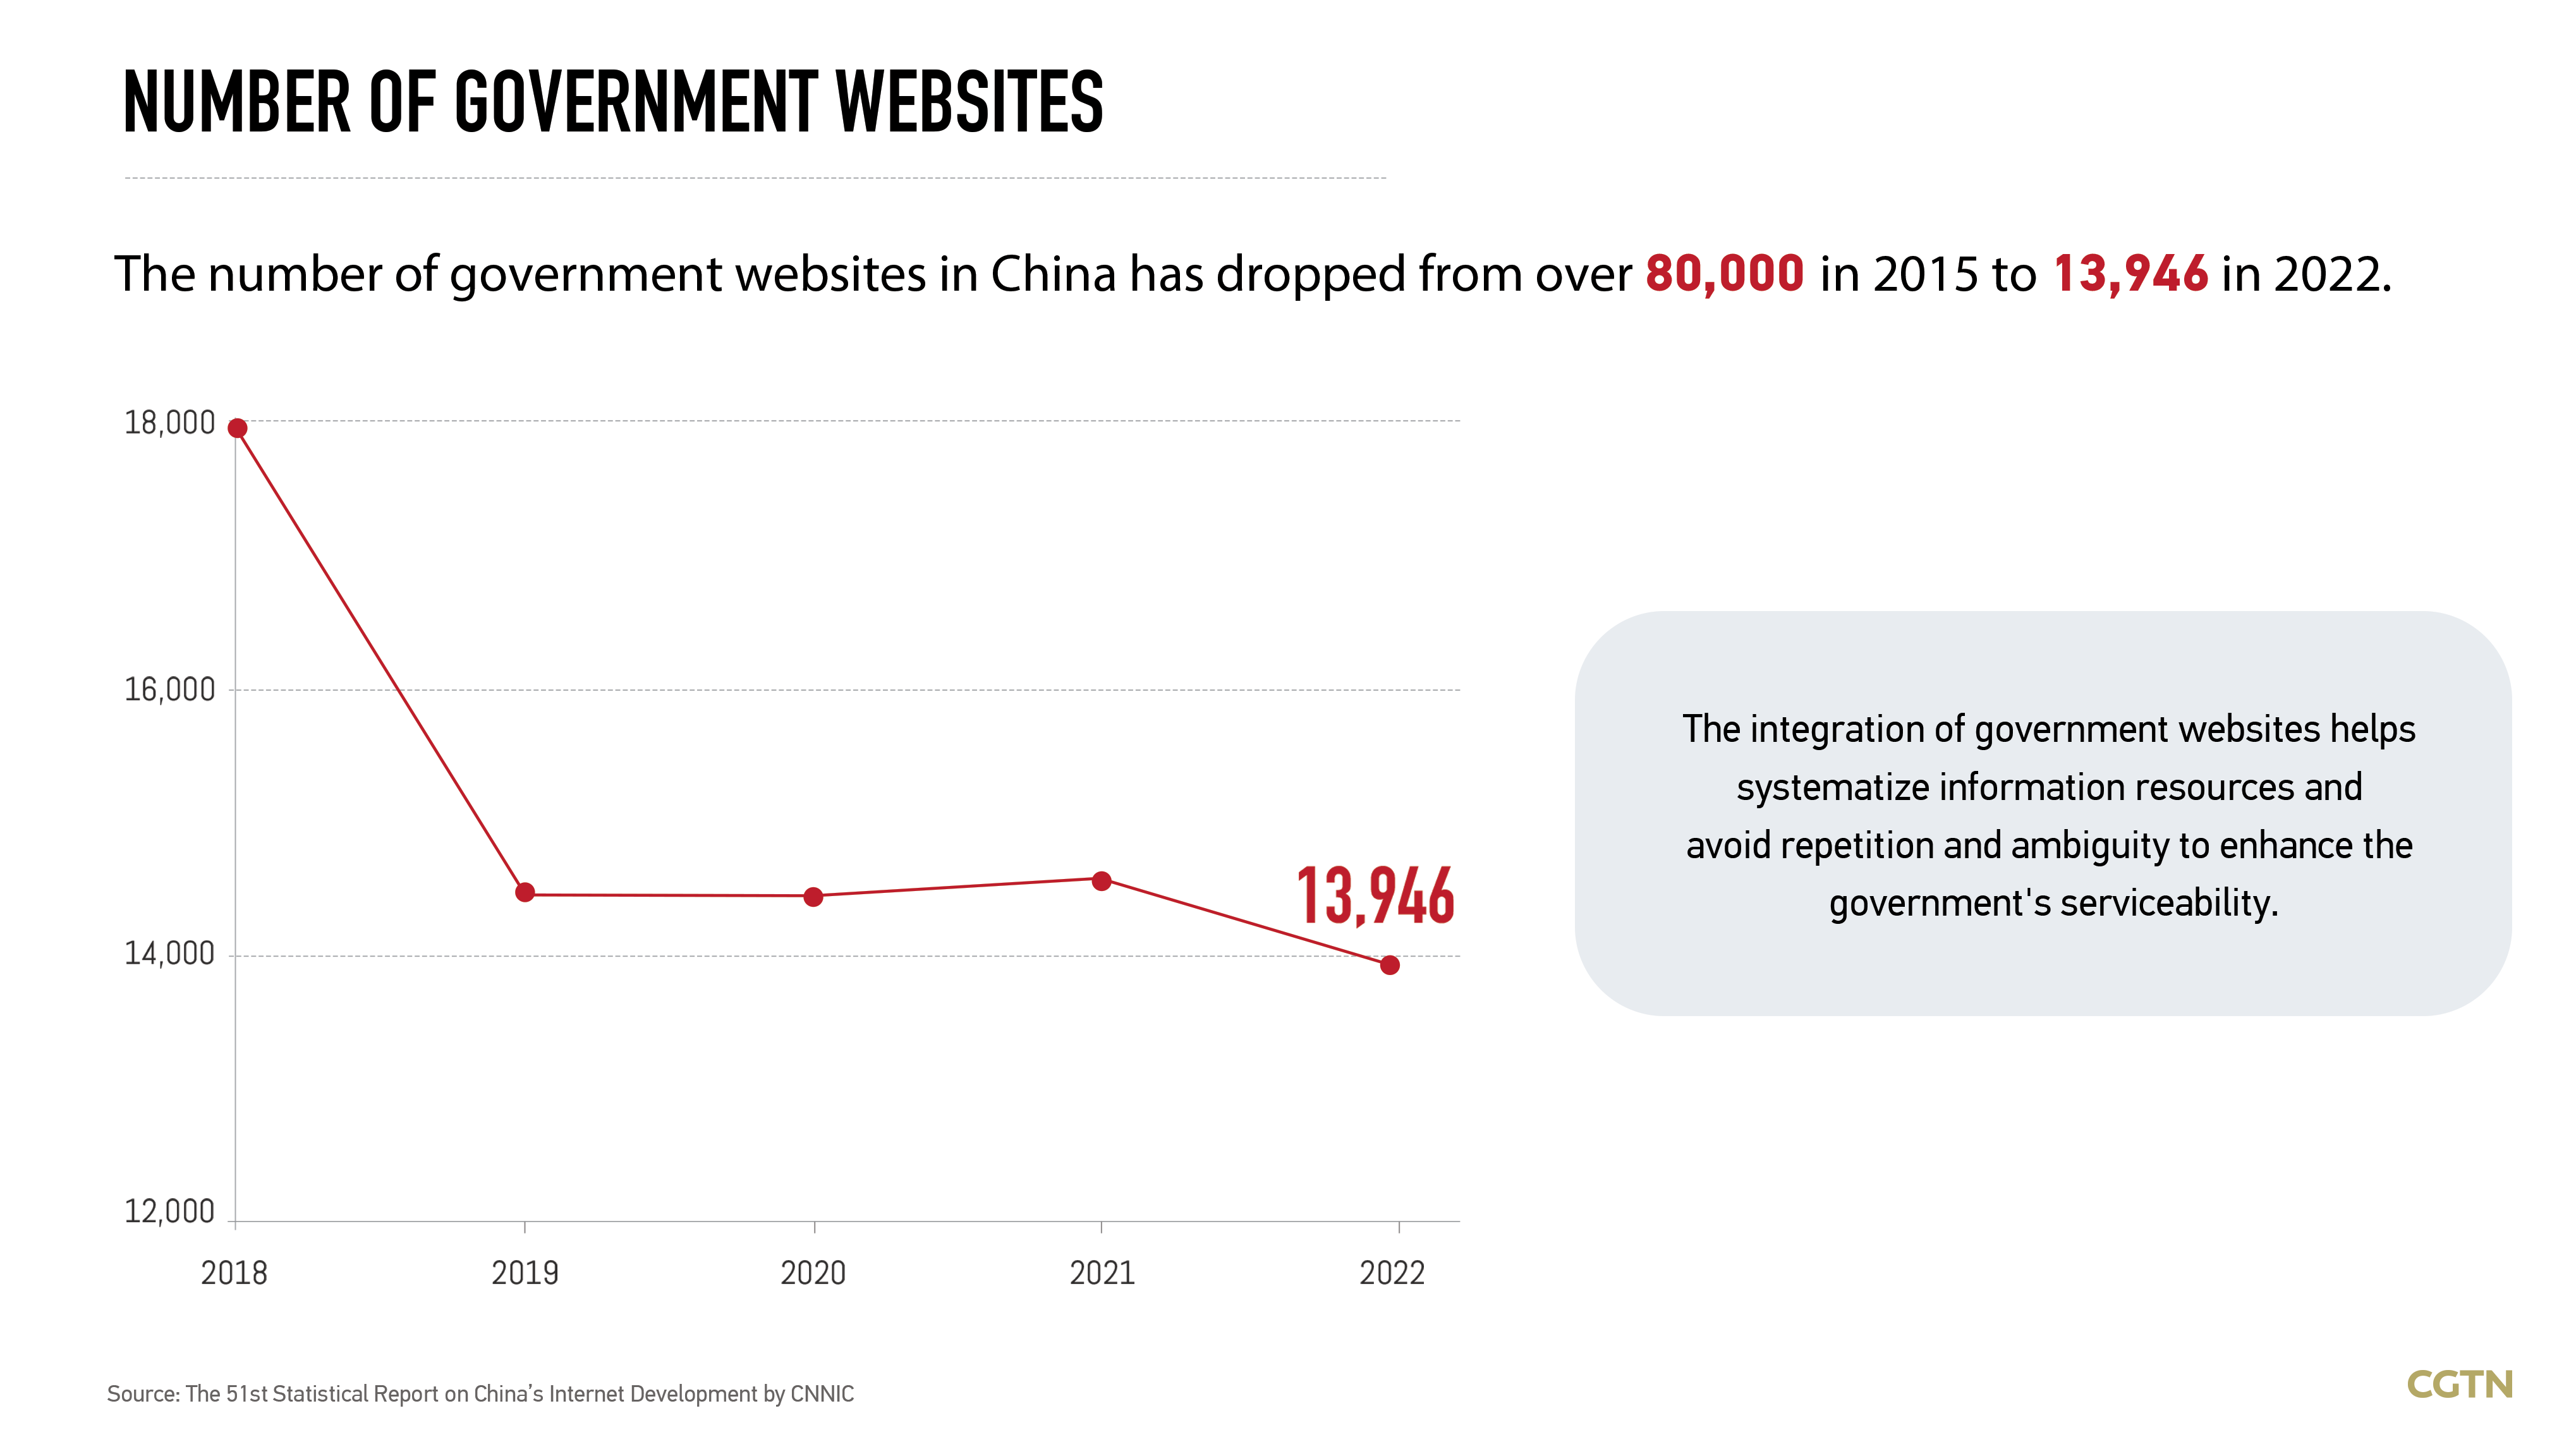 Graphics: Going digital! China's plan to enhance e-government services